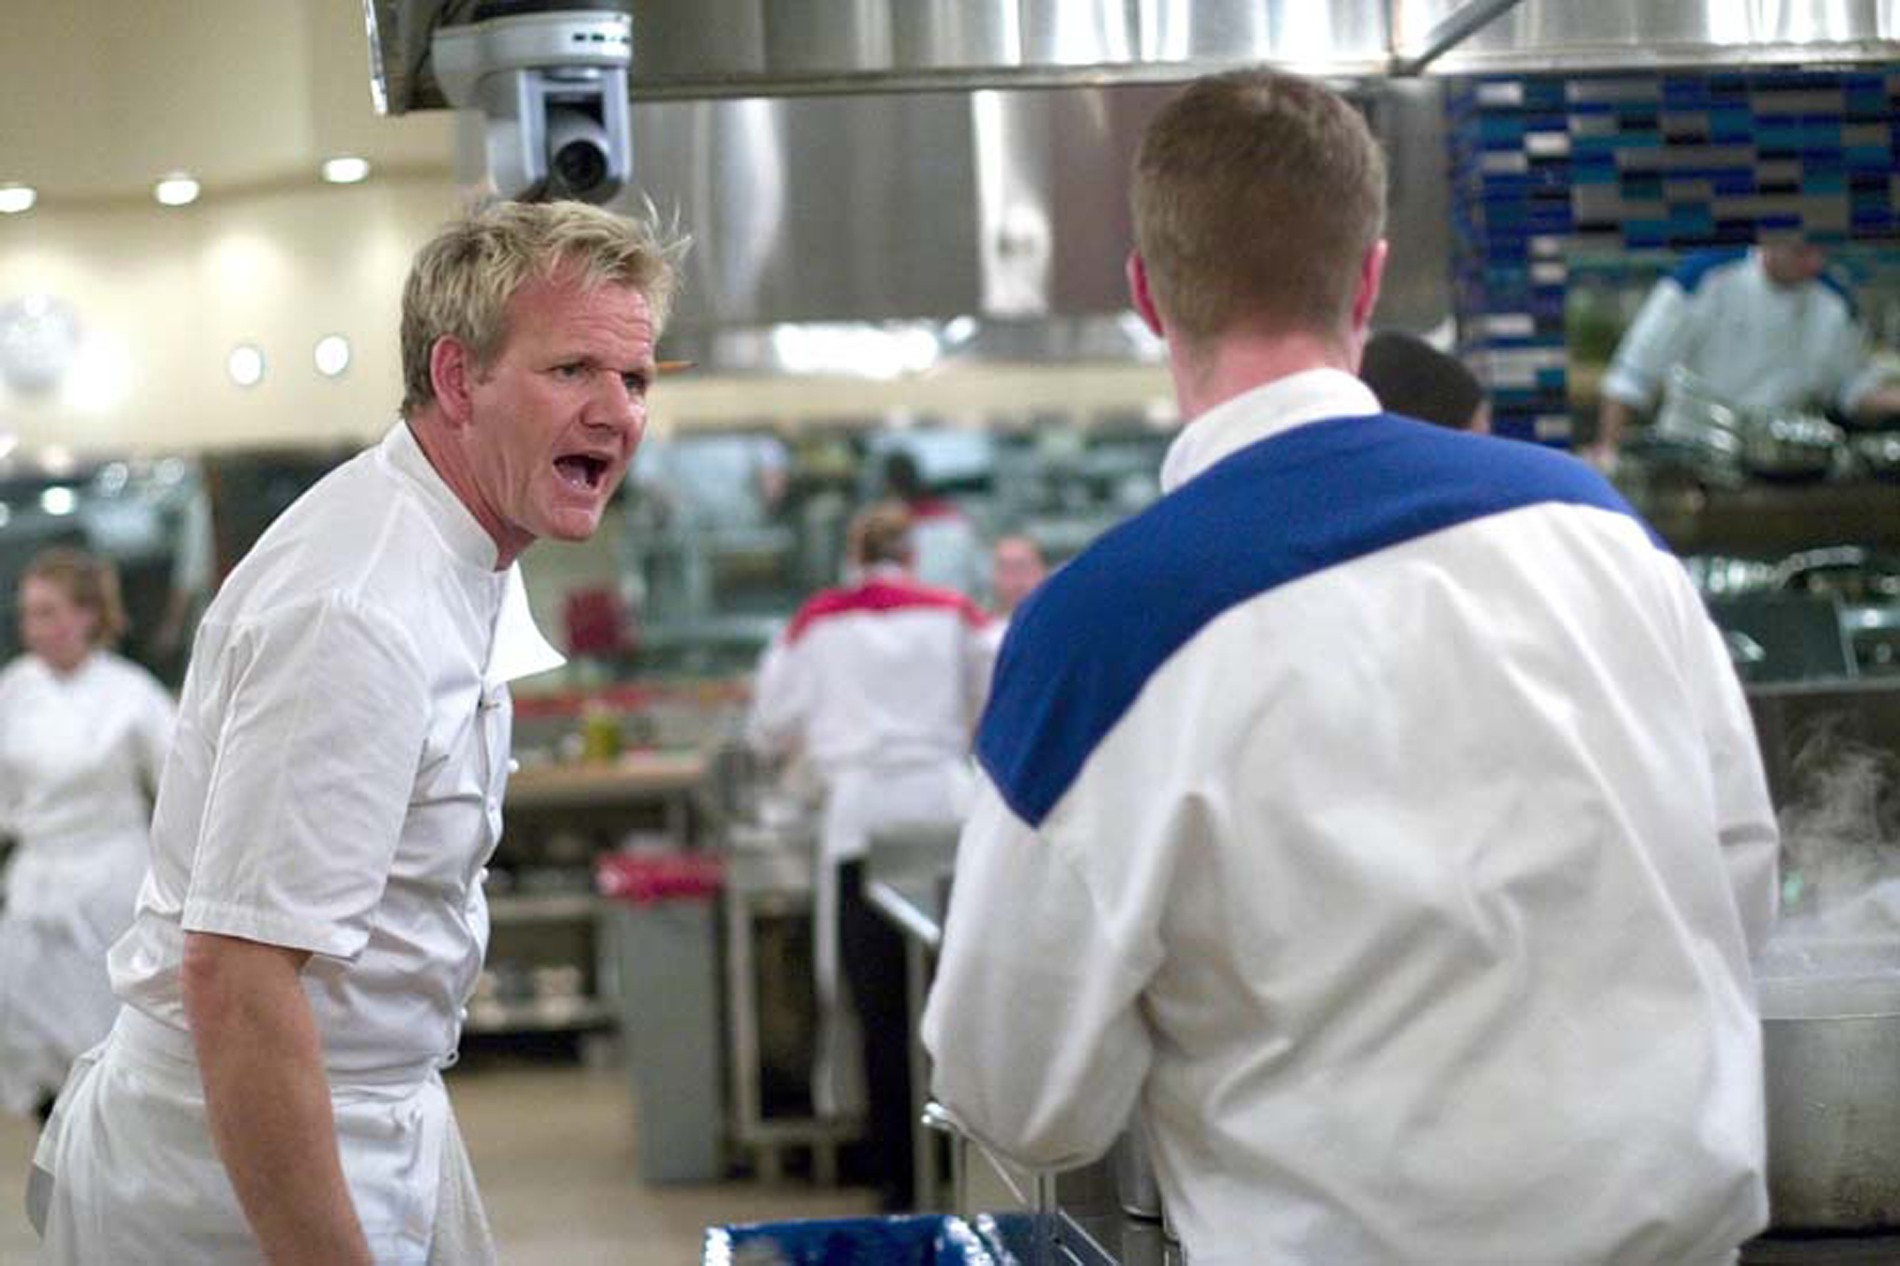 Gordon Ramsay Pad Thai Chef - Legit On An Article About ...